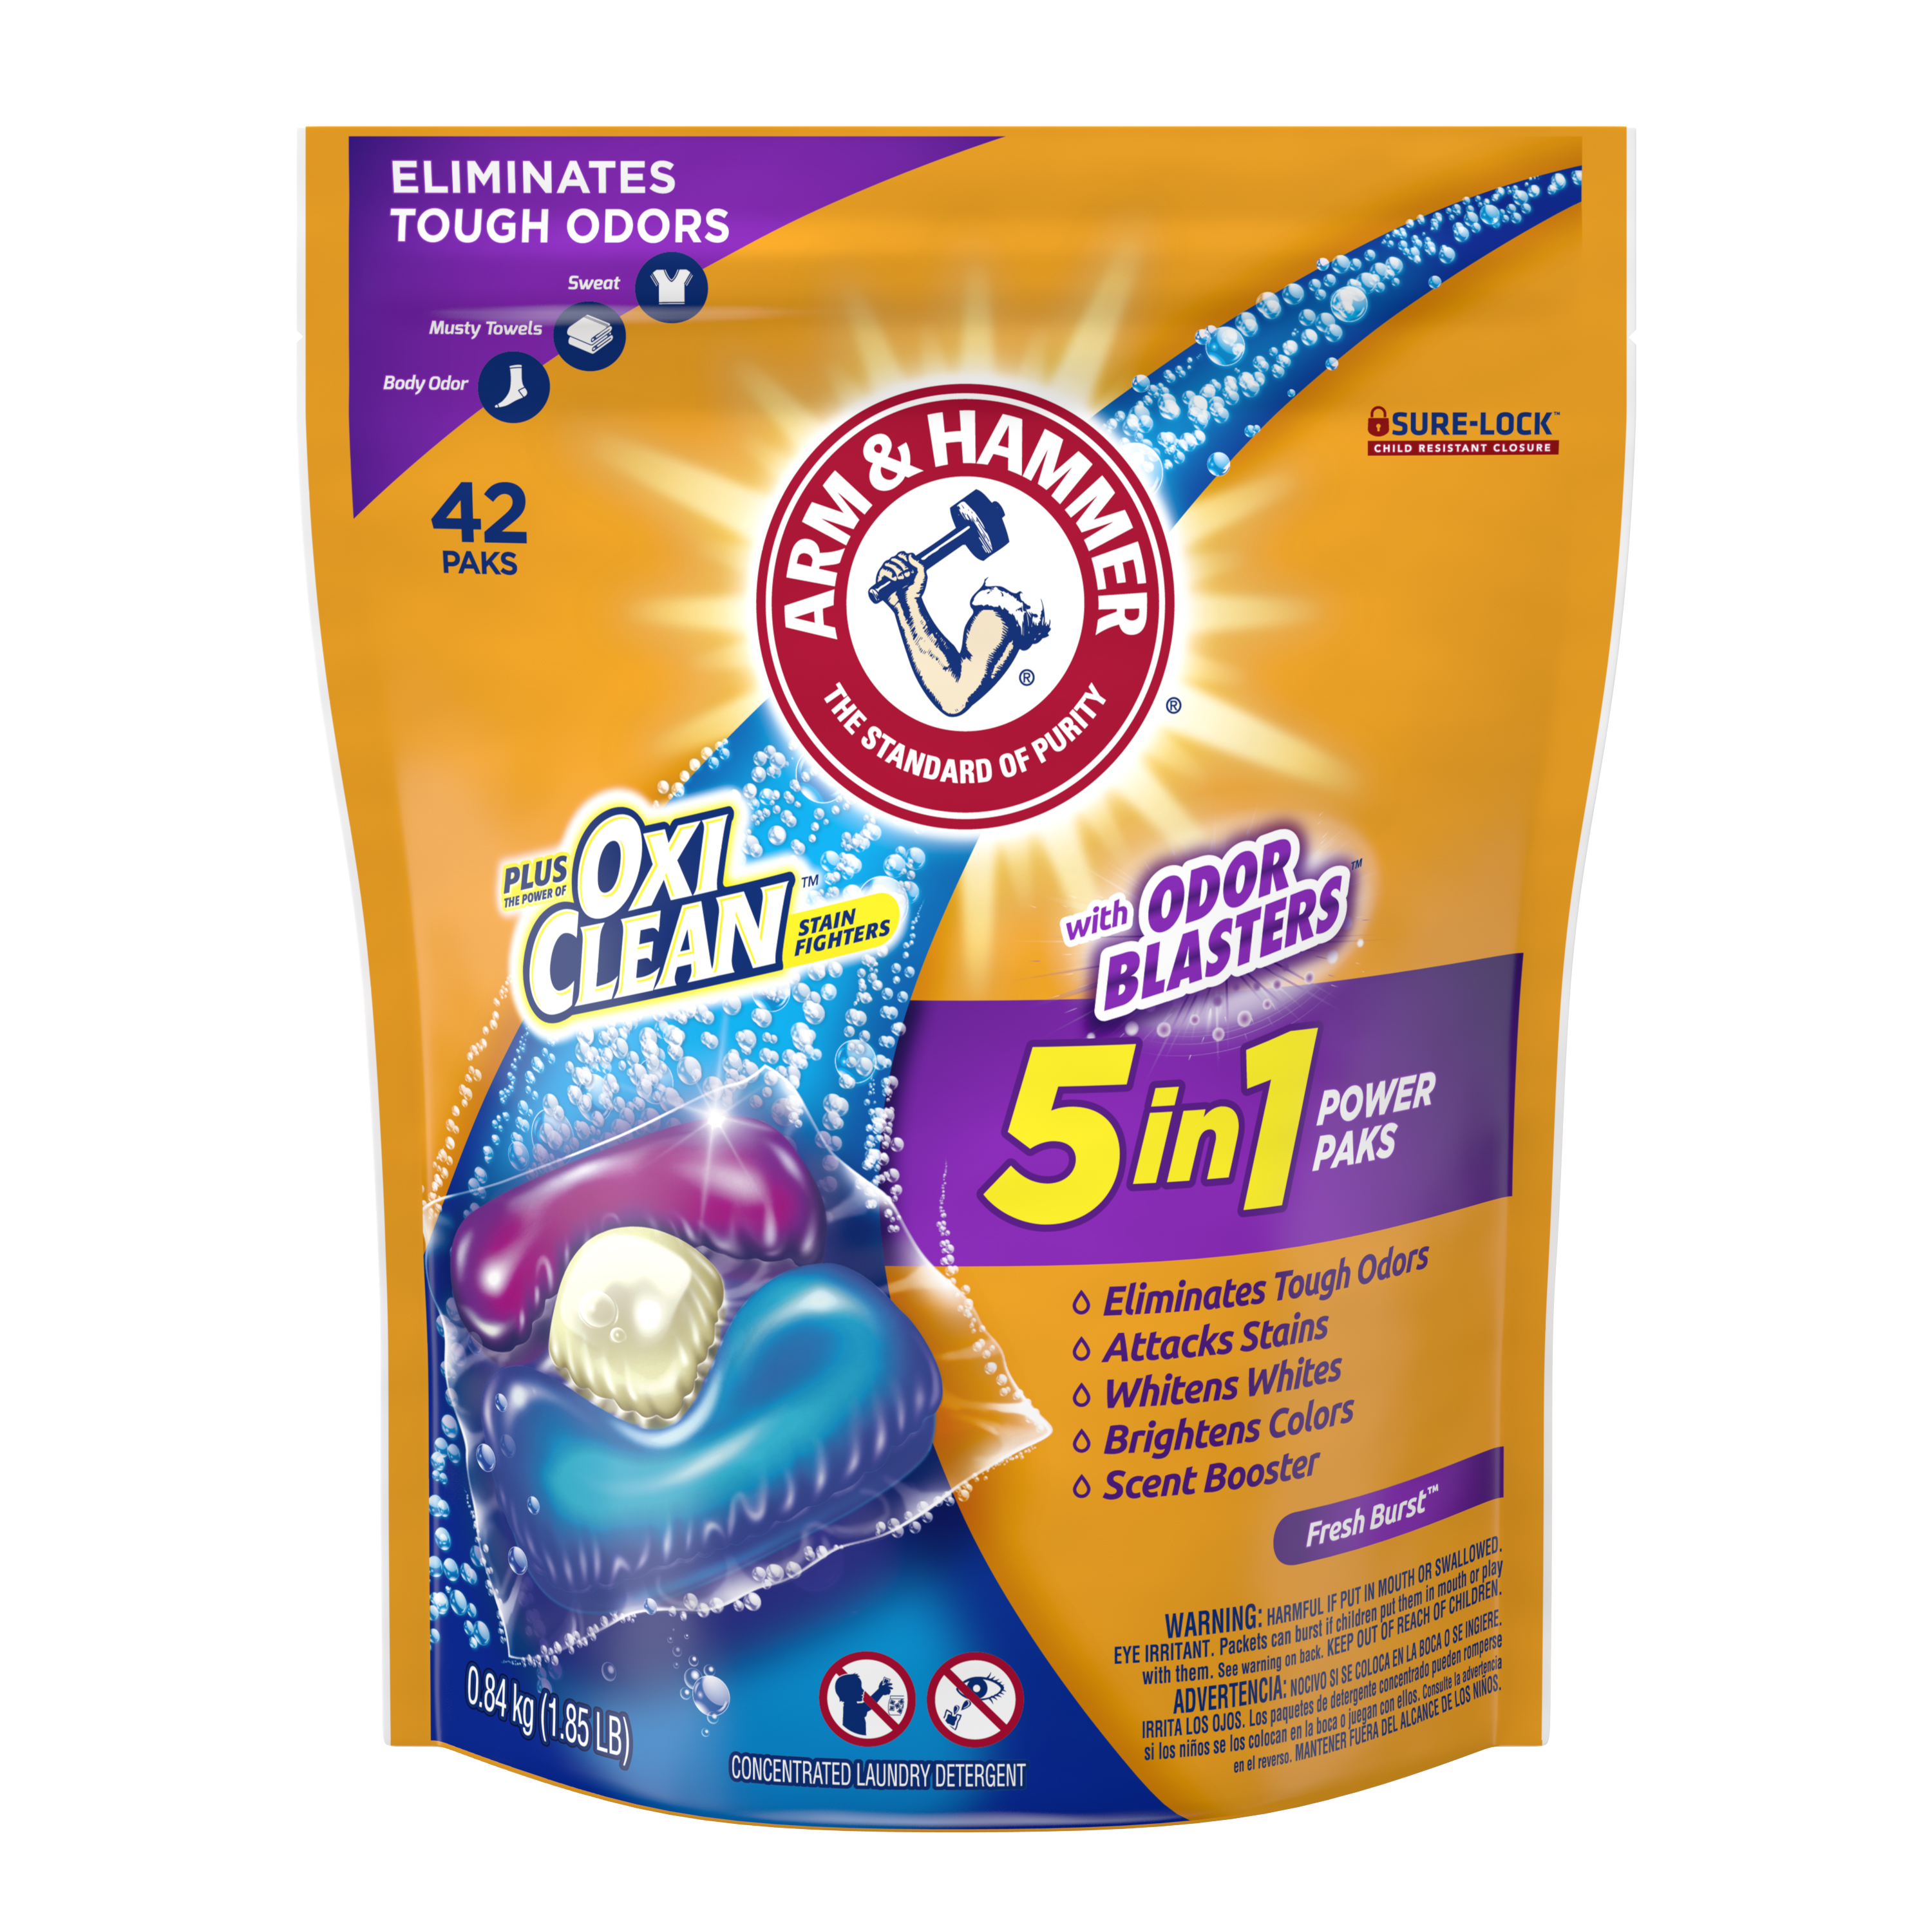 ARM & HAMMER Plus OxiClean with Odor Blasters 5-in-1 Fresh Burst Laundry Detergent Power Paks, 42 Count Bag - image 11 of 16